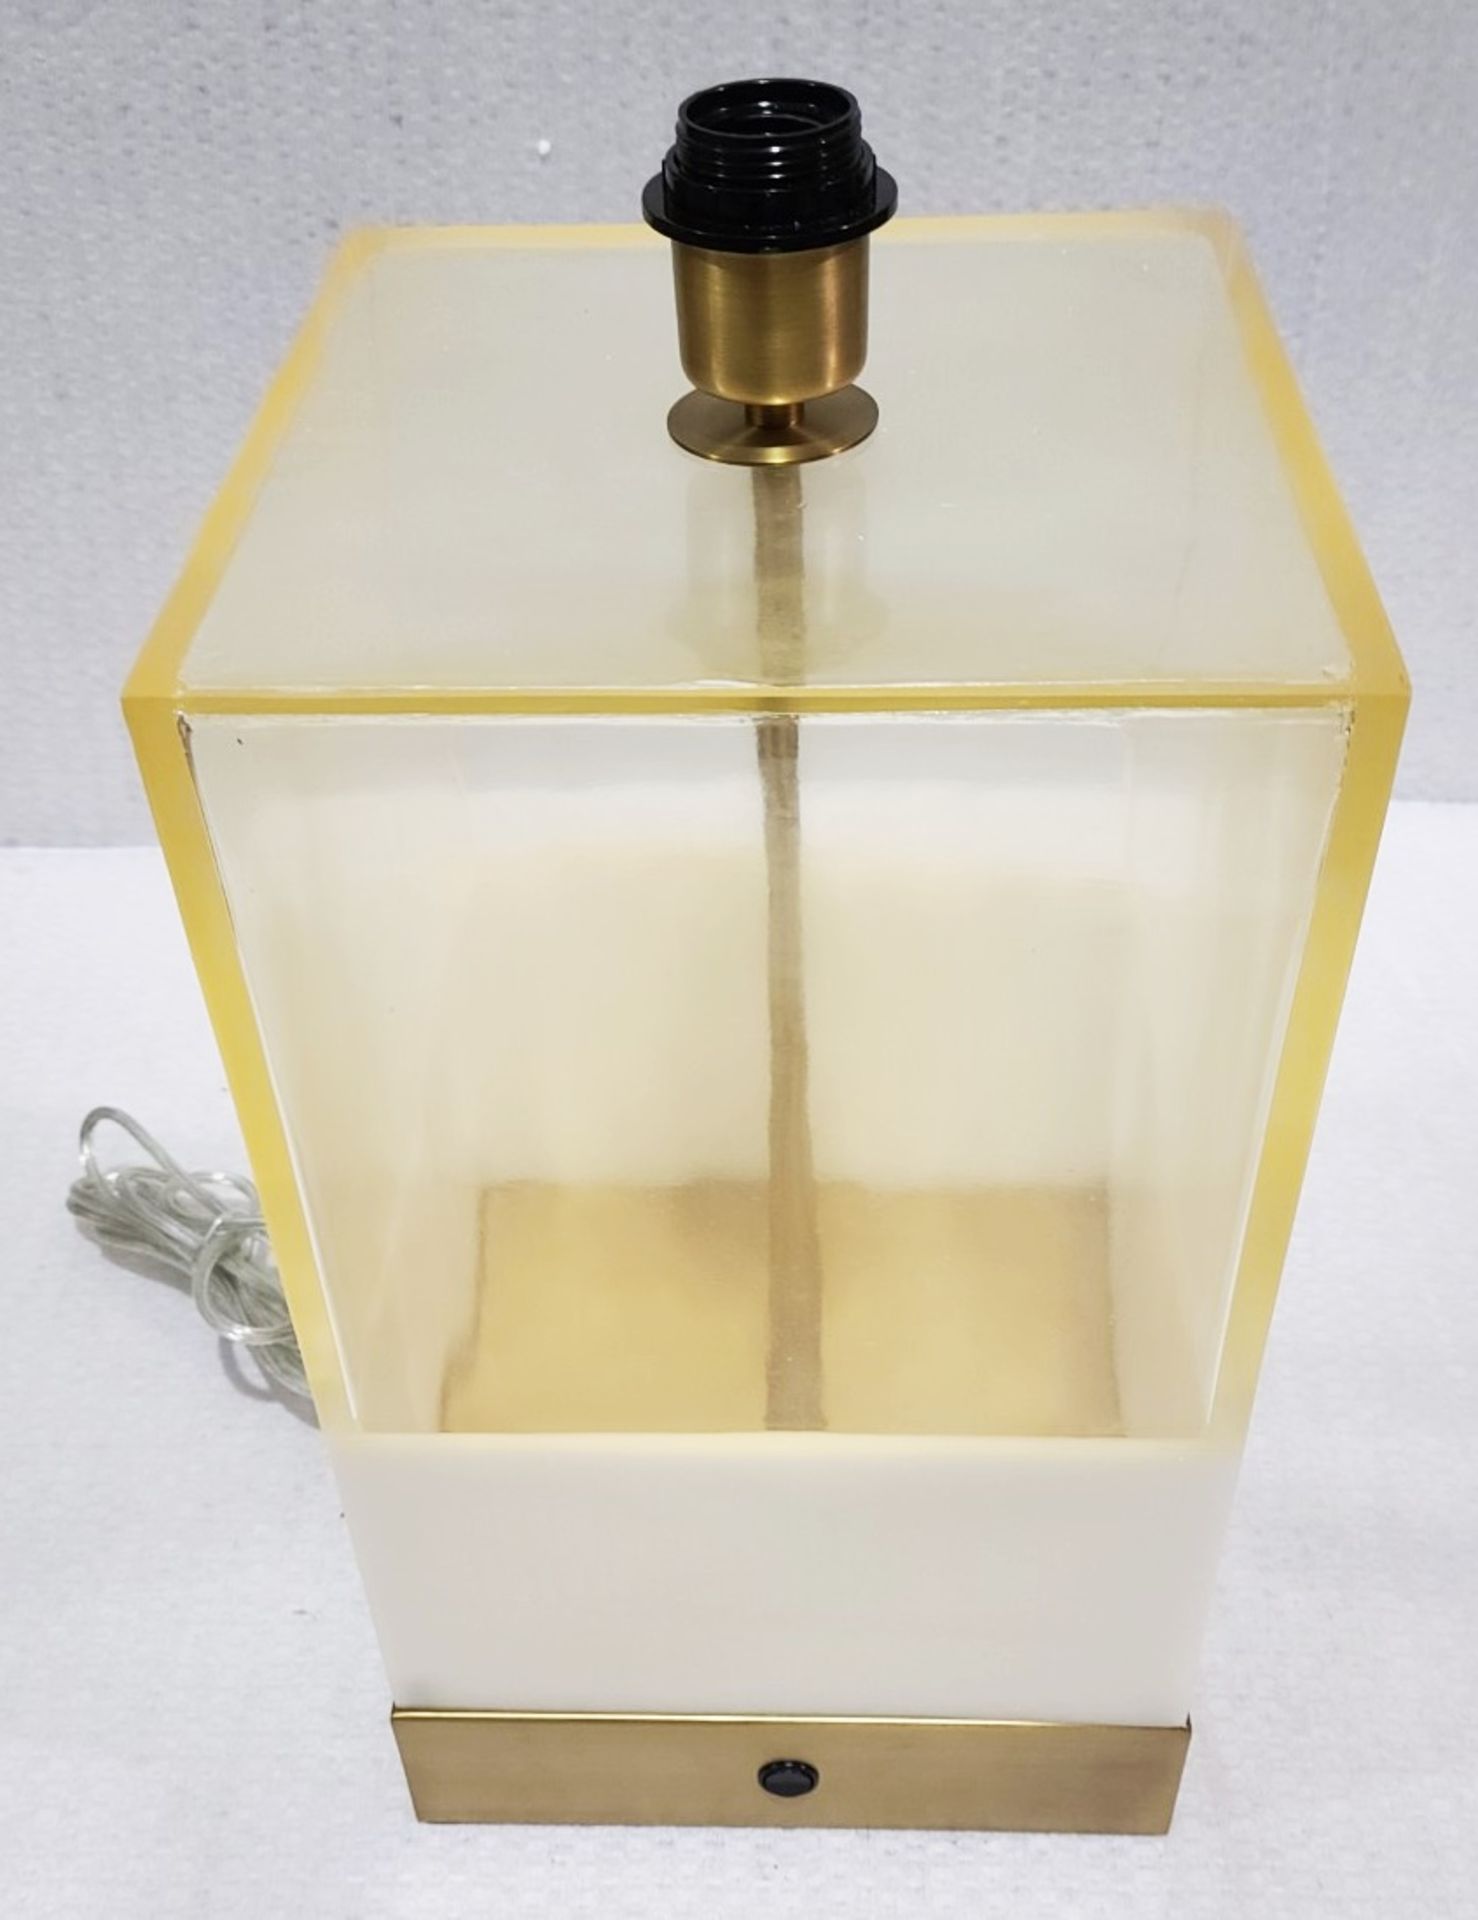 1 x CHELSOM Rectangular Gold Tinted Glass Box Table Lamp With Stone Lower Third And Brass Base - Image 9 of 10